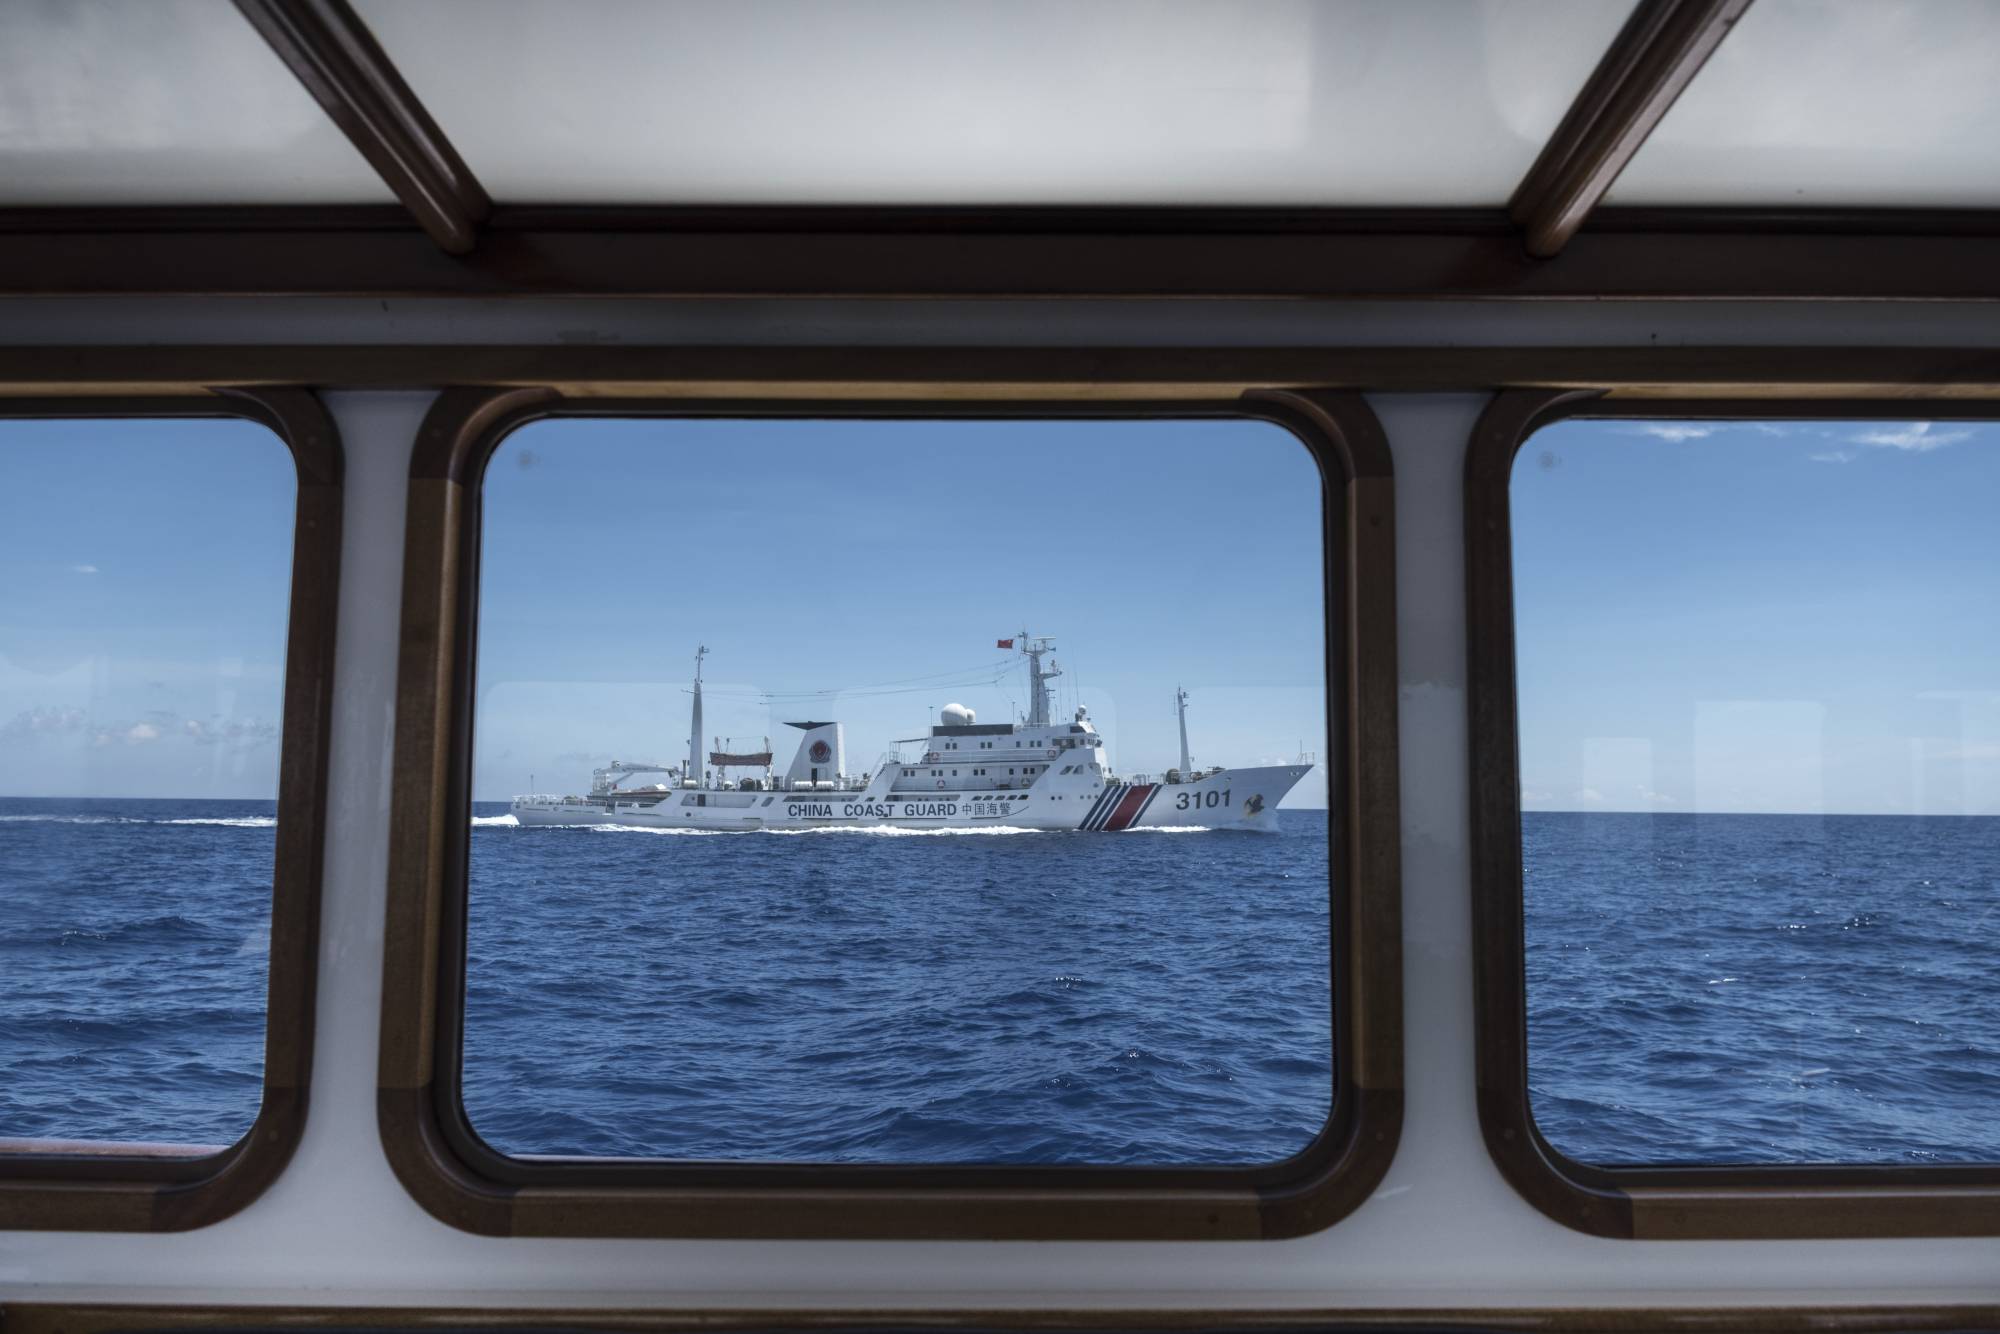 A Chinese Coast Guard ship outside Scarborough Shoal in the South China Sea, in June 2016 | SERGEY PONOMAREV / THE NEW YORK TIMES